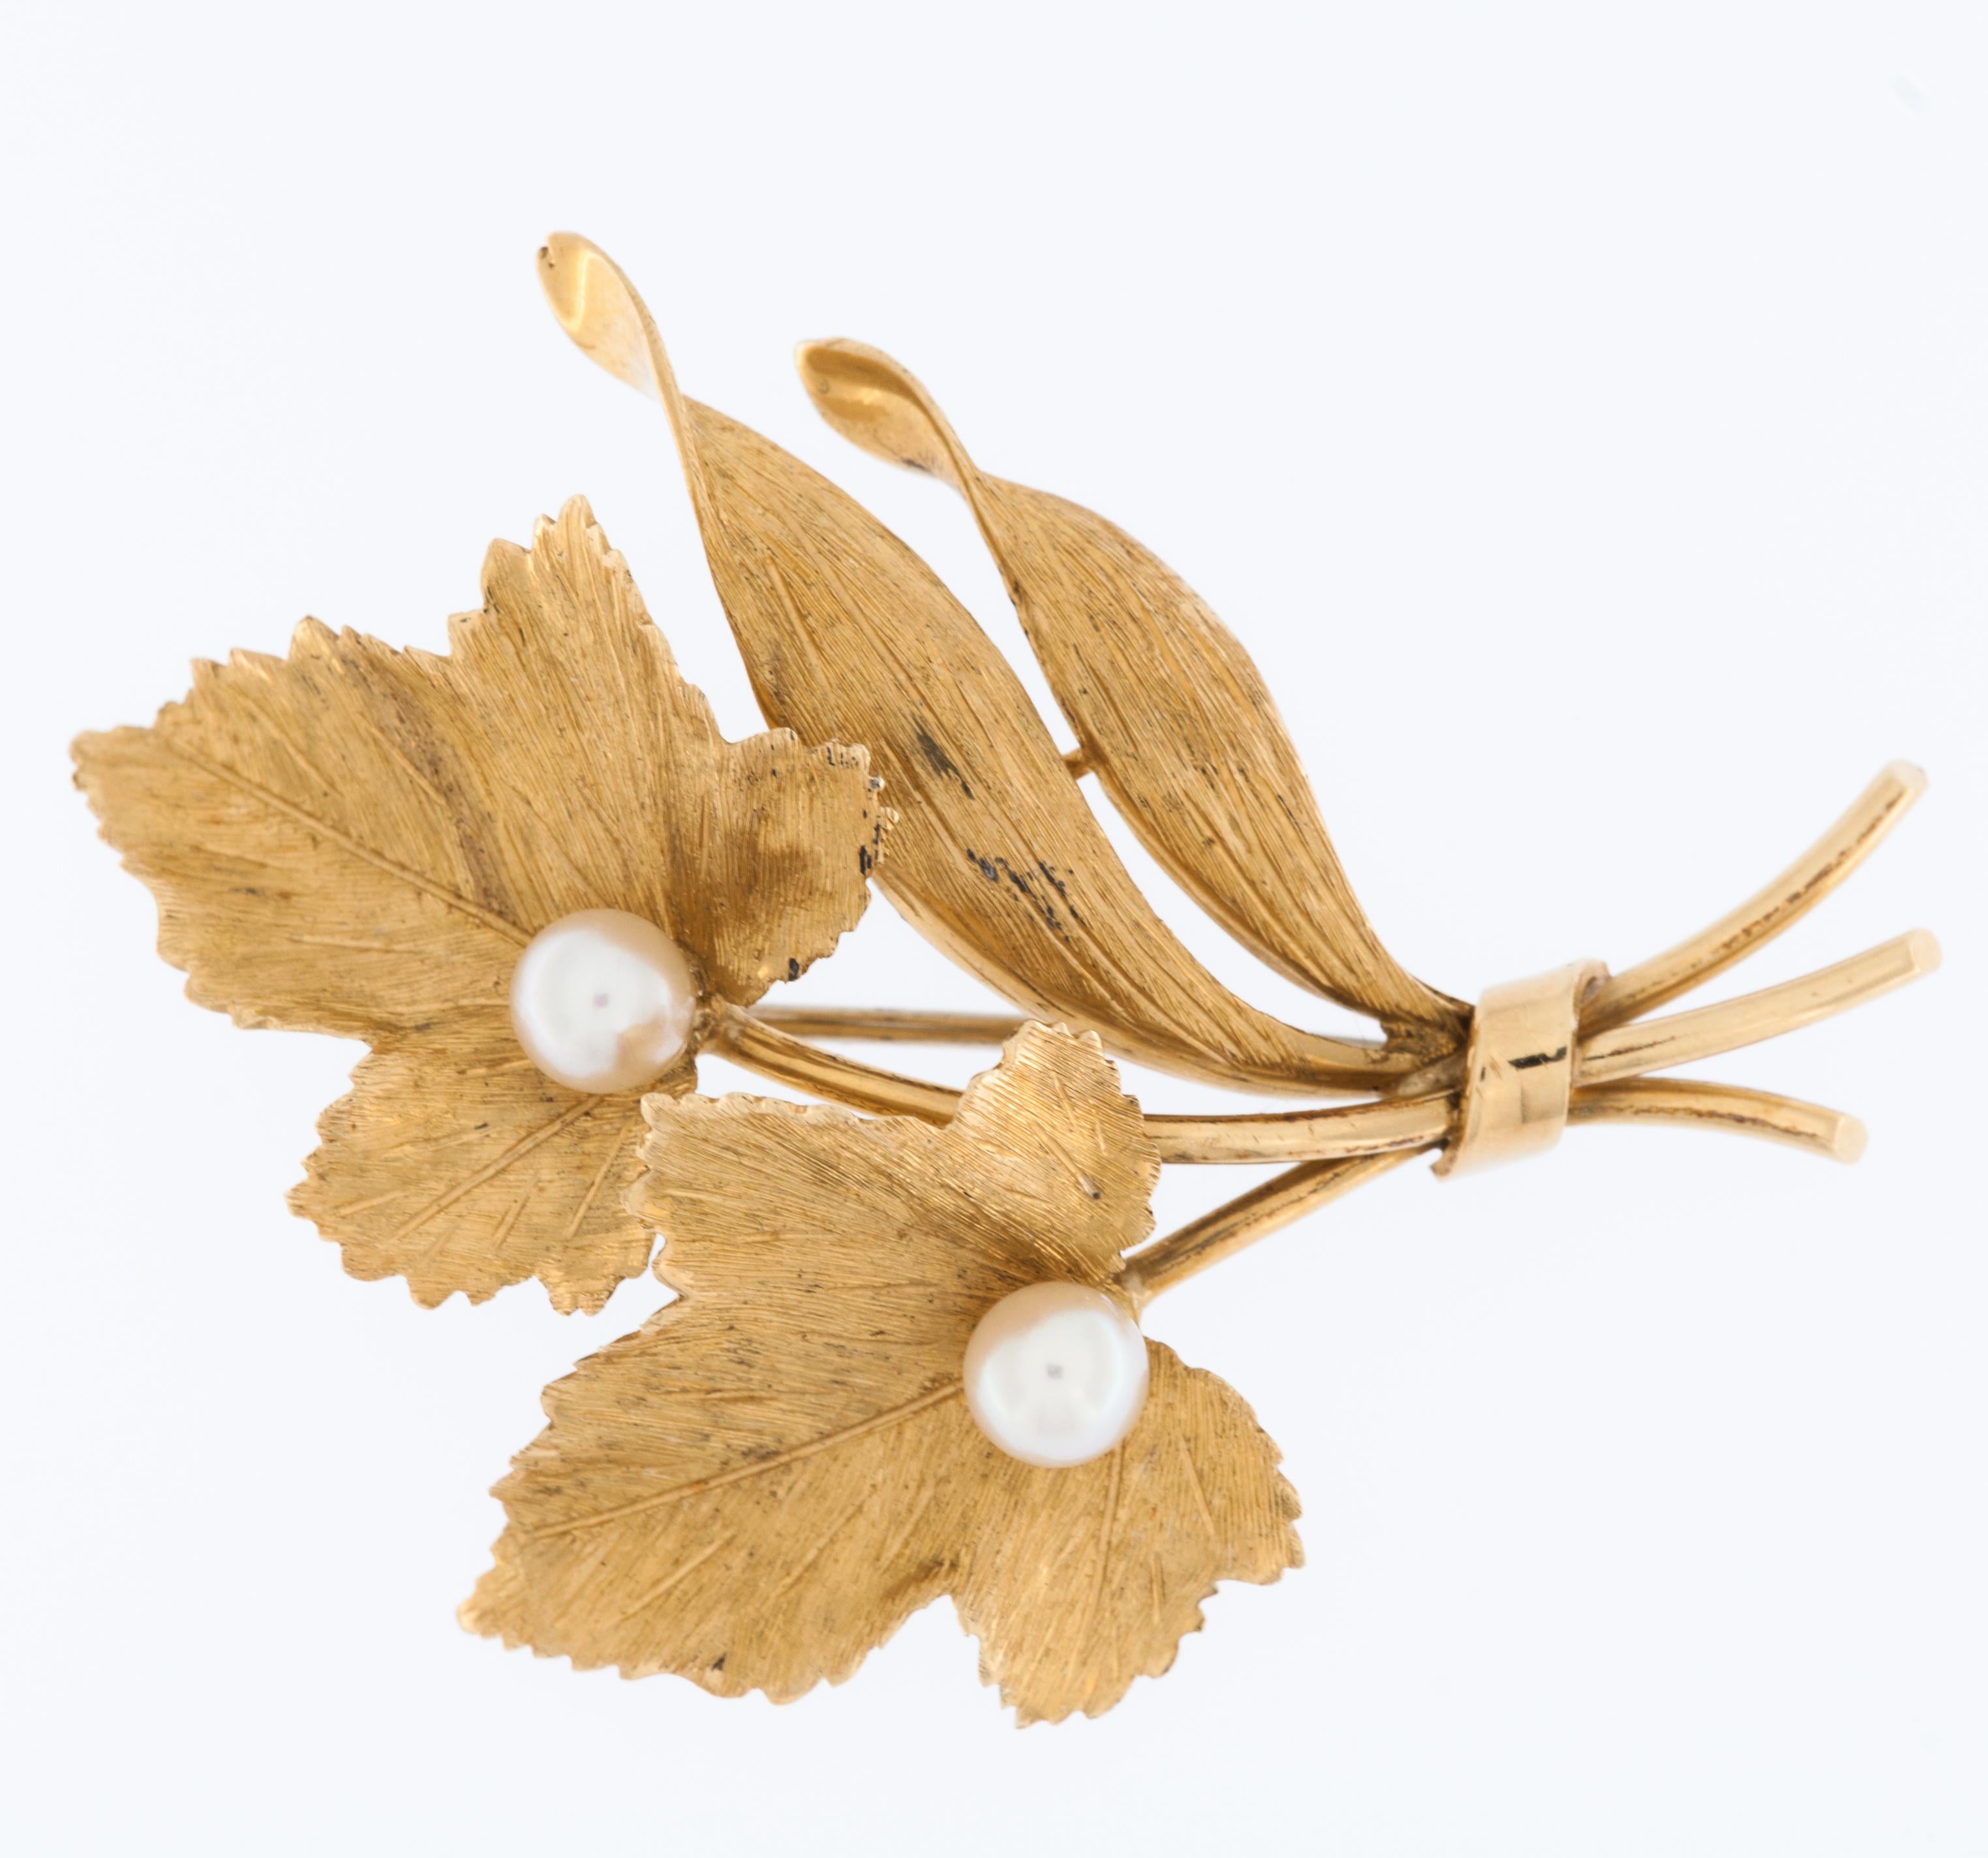 The Retro 18kt Yellow Gold Vineyard Leaf Brooch with Pearls is a exquisite piece of jewelry that reflects the design aesthetics of the Retro era, which typically refers to the period between the 1930s and 1950s. 

Crafted from 18-karat yellow gold,